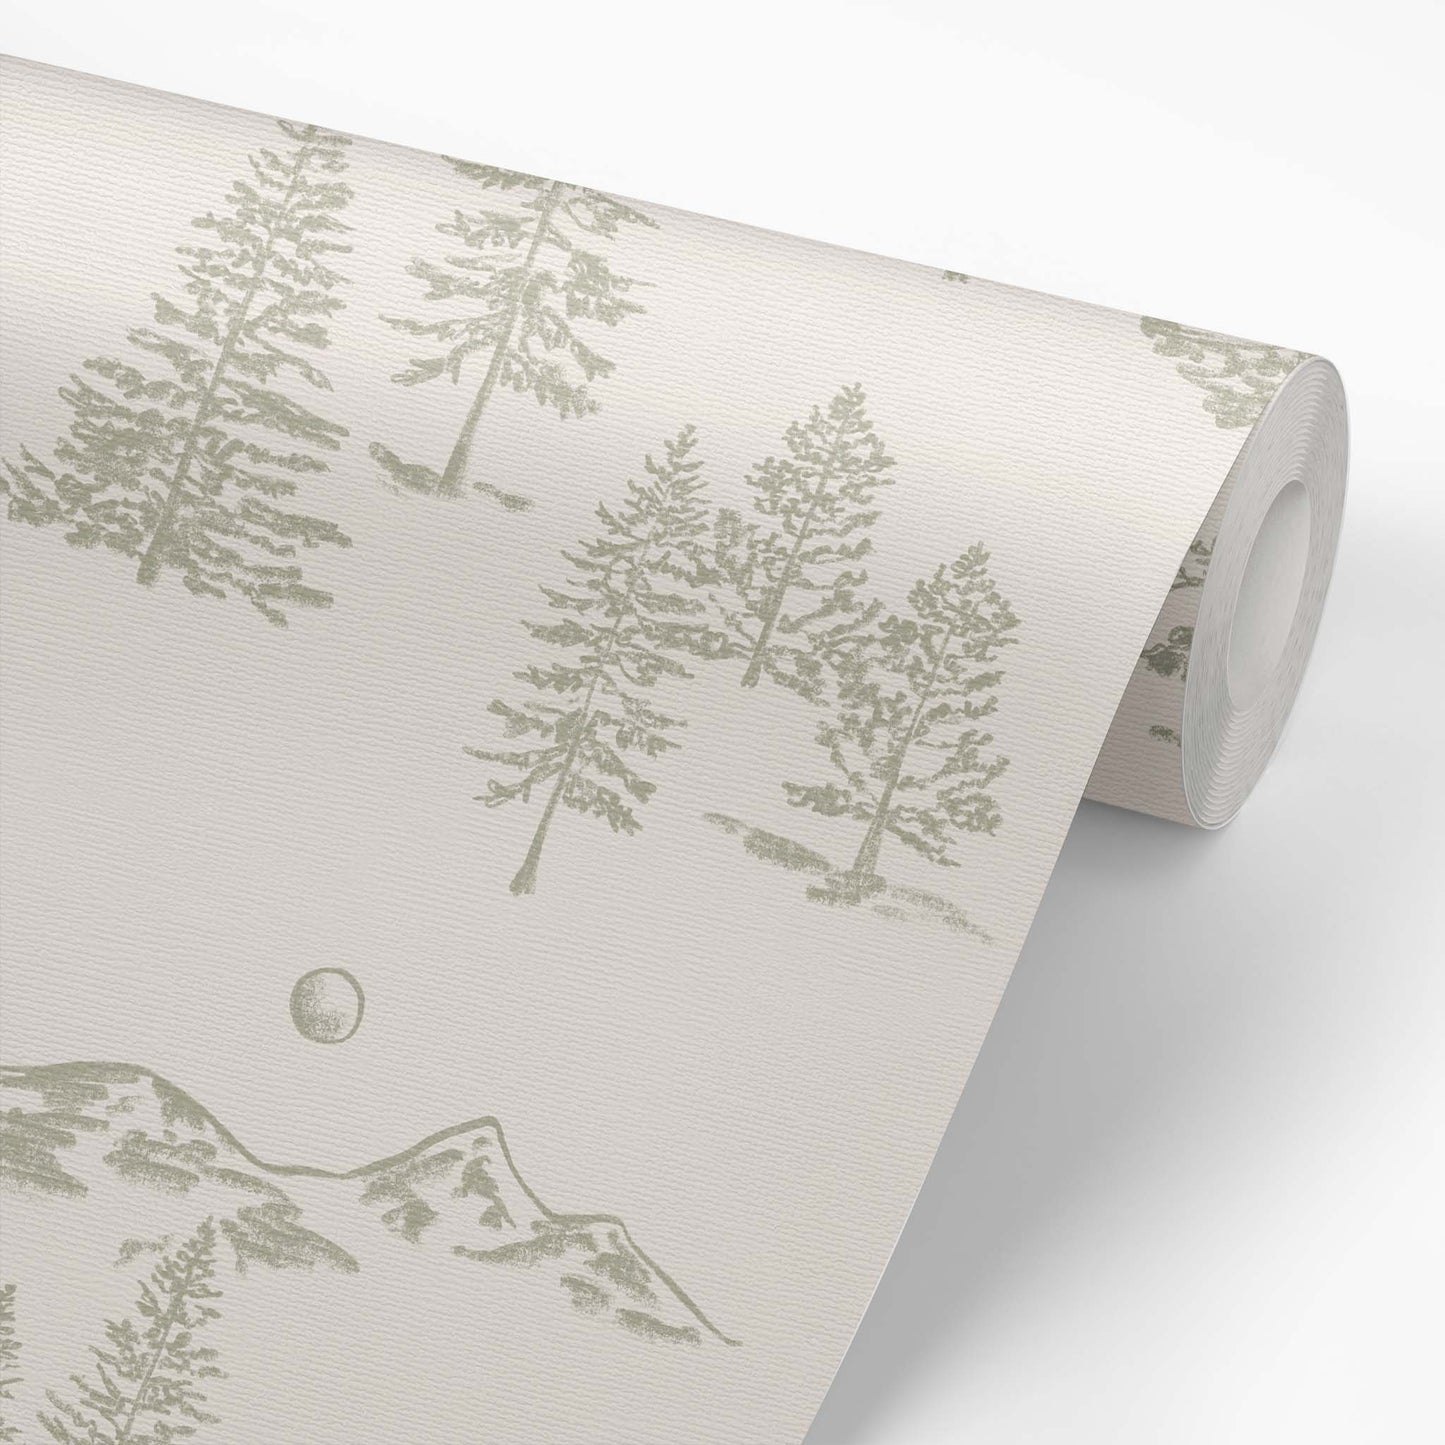 This wallpaper roll shows our Mountain Green Wallpaper in Cream. This peel and stick, removable wallpaper was designed by artist Mariah Cottrell and features beautifully sketched mountains and trees.